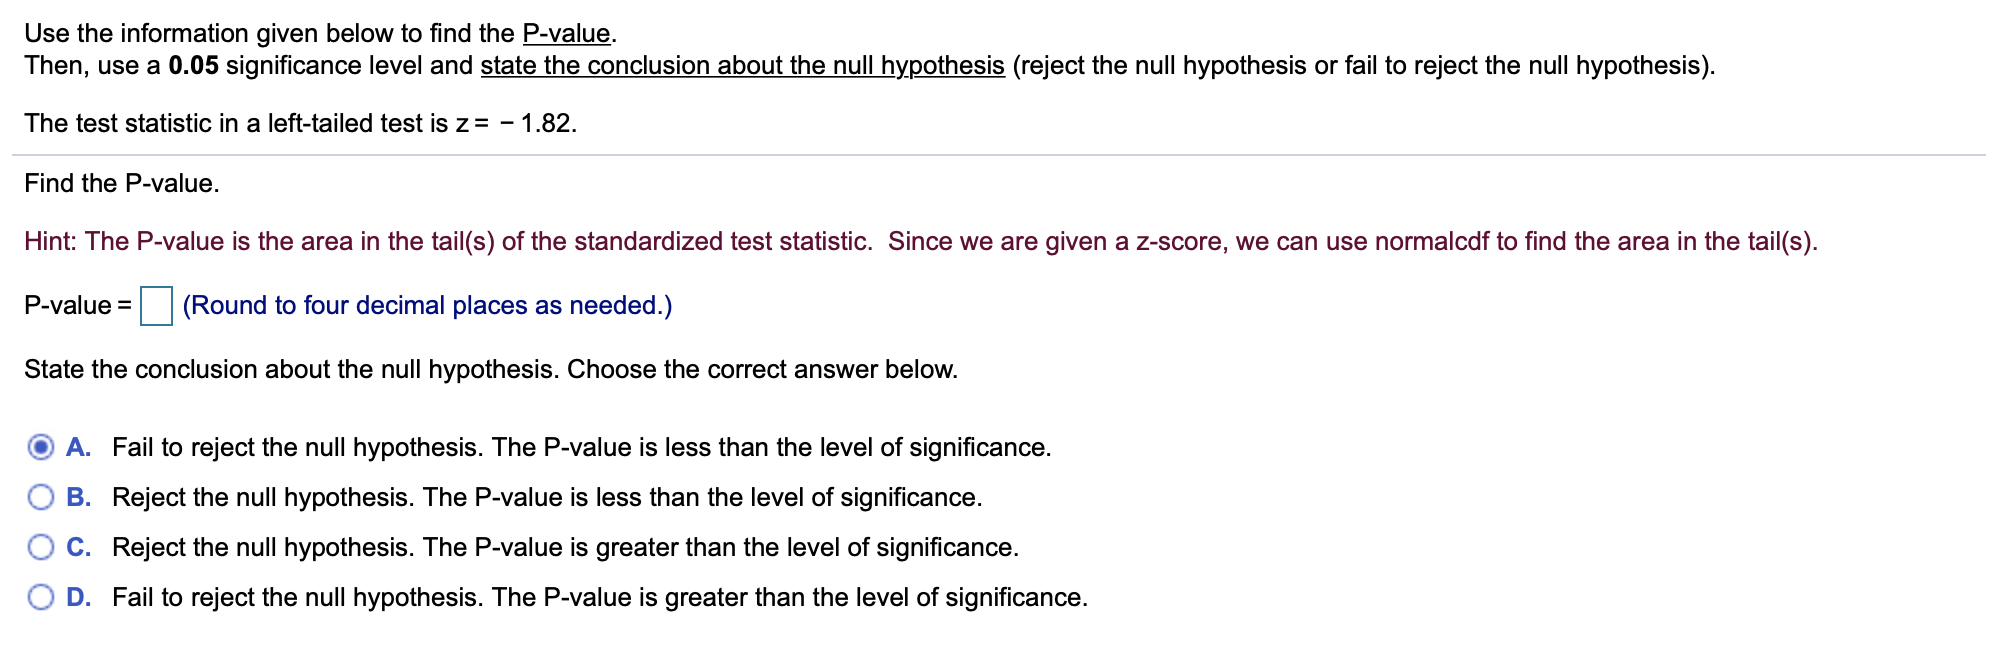 Use the information given below to find the P-value
Then, use a 0.05 significance level and state the conclusion about the null hypothesis (reject the null hypothesis or fail to reject the null hypothesis)
The test statistic in a left-tailed test is z= -1.82.
Find the P-value.
Hint: The P-value is the area in the tail(s) of the standardized test statistic. Since we are given a z-score, we can use normalcdf to find the area in the tail(s)
P-value
(Round to four decimal places as needed.)
State the conclusion about the null hypothesis. Choose the correct answer below.
A. Fail to reject the null hypothesis. The P-value is less than the level of significance.
B. Reject the null hypothesis. The P-value is less than the level of significance.
C. Reject the null hypothesis. The P-value is greater than the level of significance.
D. Fail to reject the null hypothesis. The P-value is greater than the level of significance.
